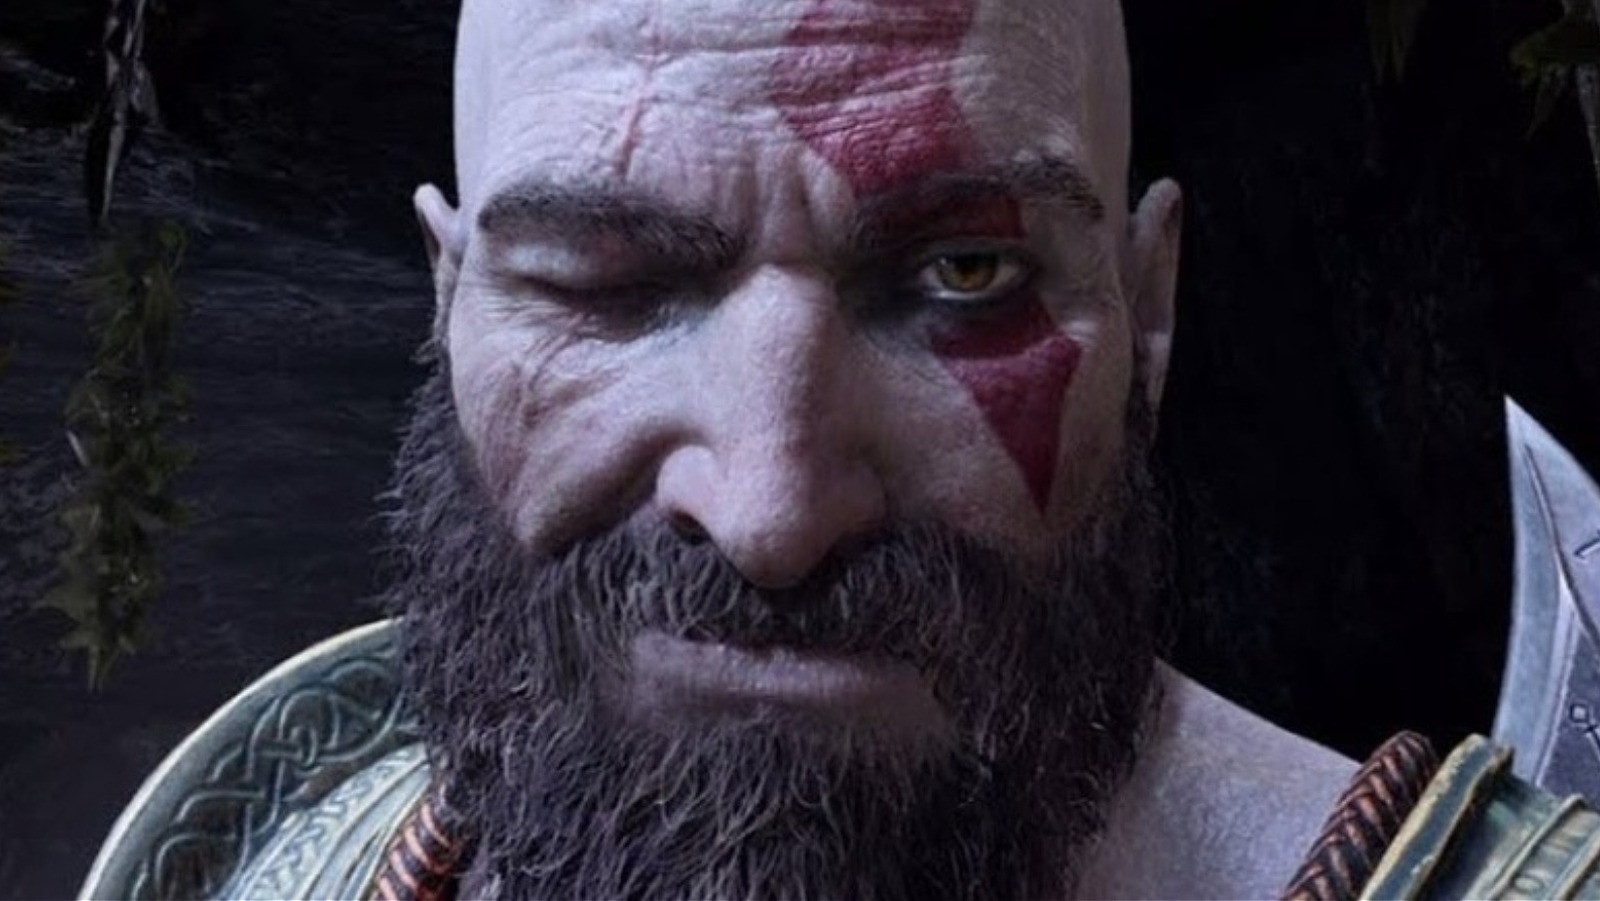 Christopher Judge Confirms He Wants to Play Kratos in God of War